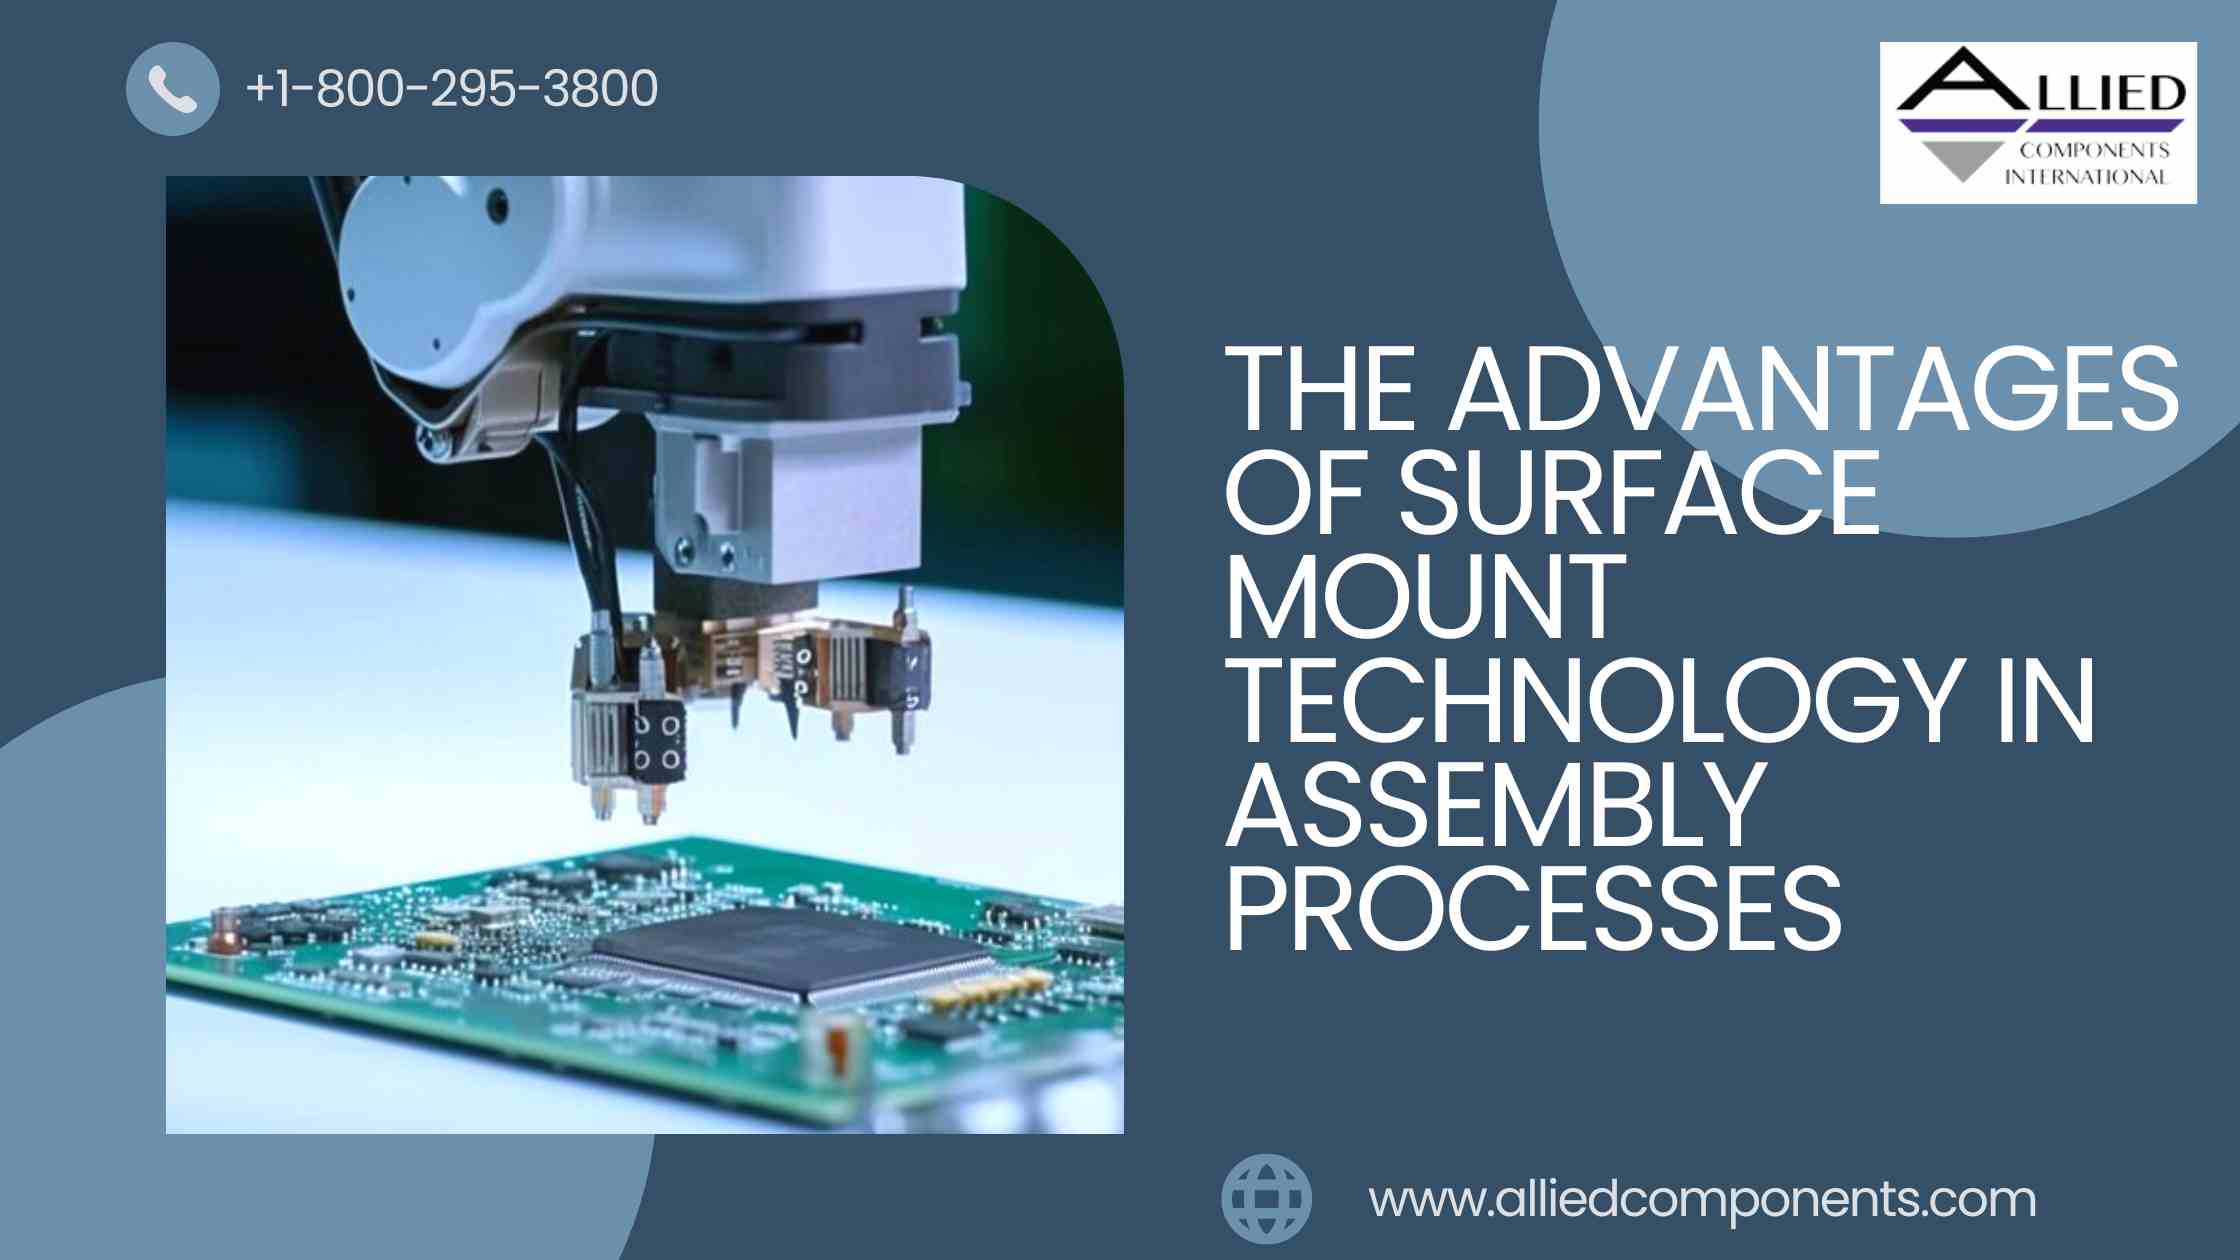 The Advantages of Surface Mount Technology (SMT) in Assembly Processes